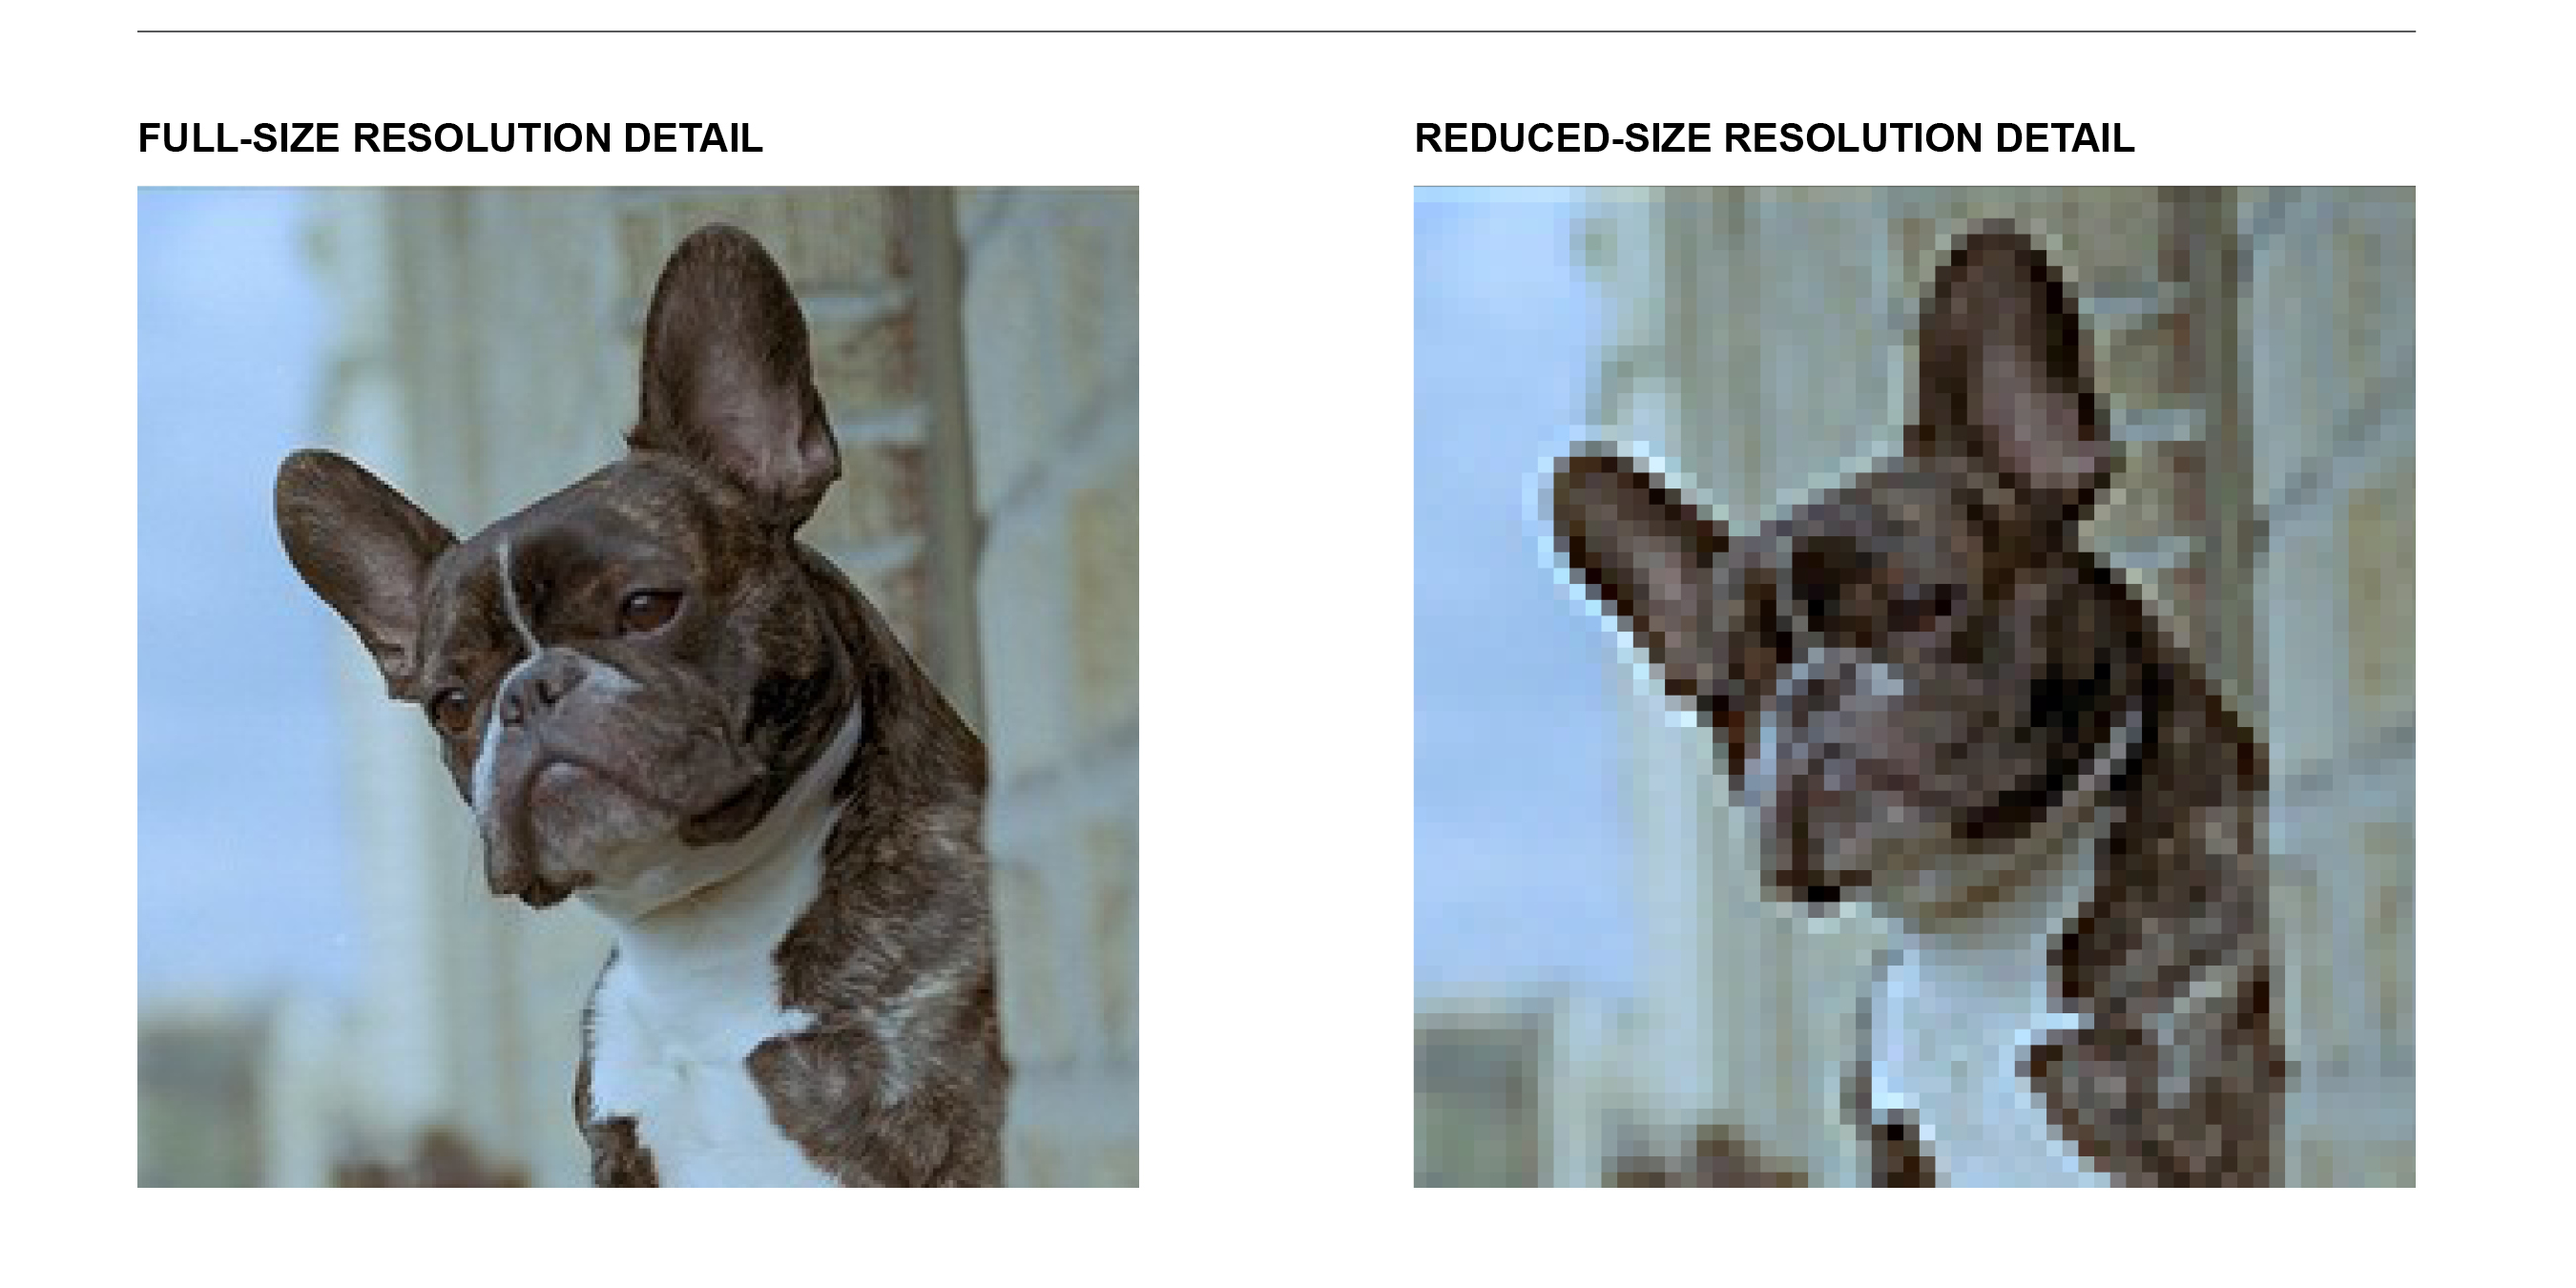 Comparison of full-res detail of dog with lower-res detail of dog